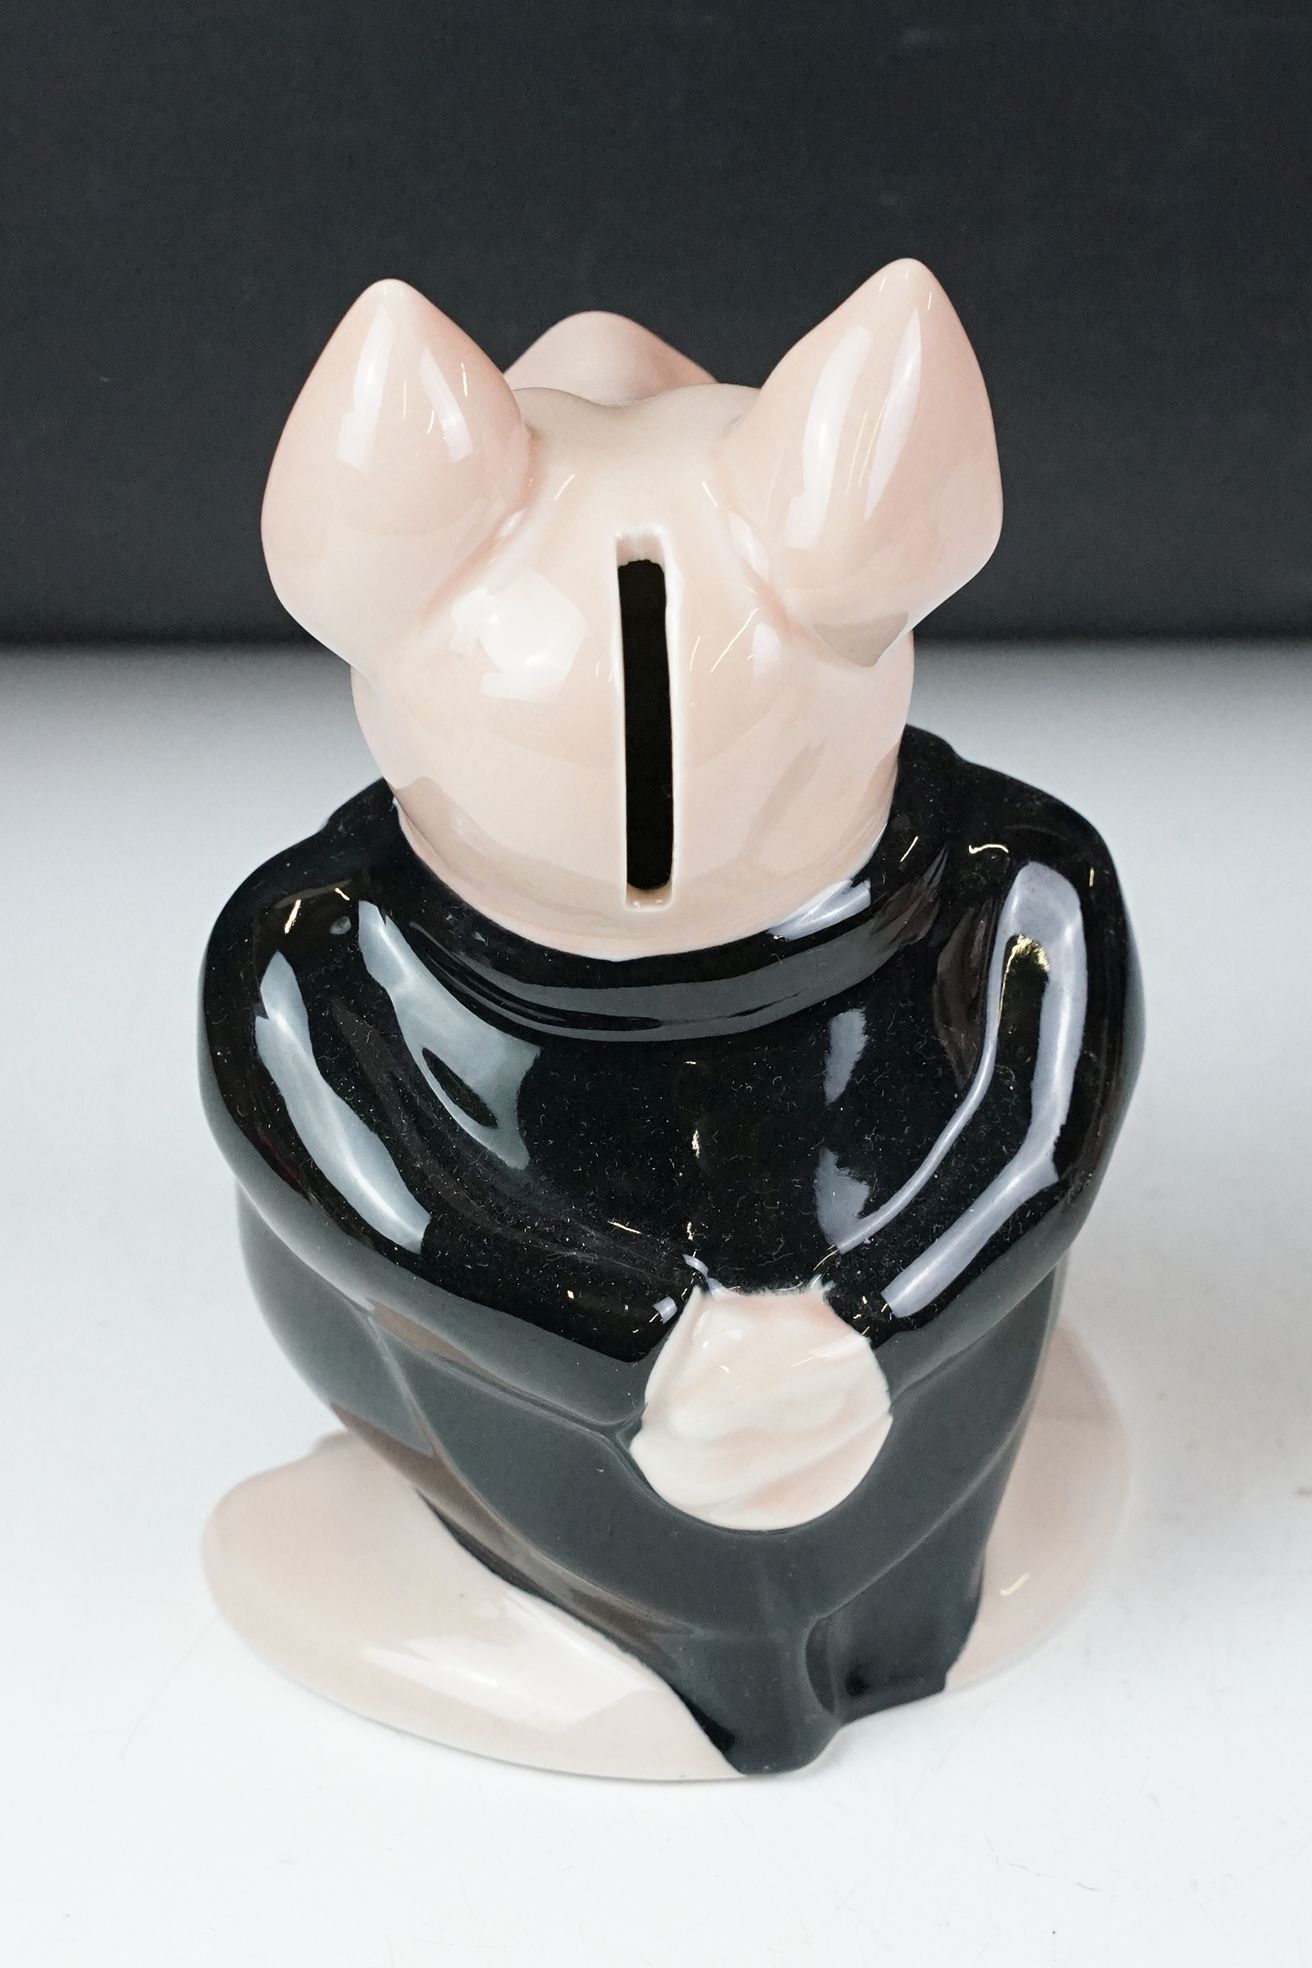 Collection of seven Wade NatWest ceramic piggy banks - Image 9 of 10